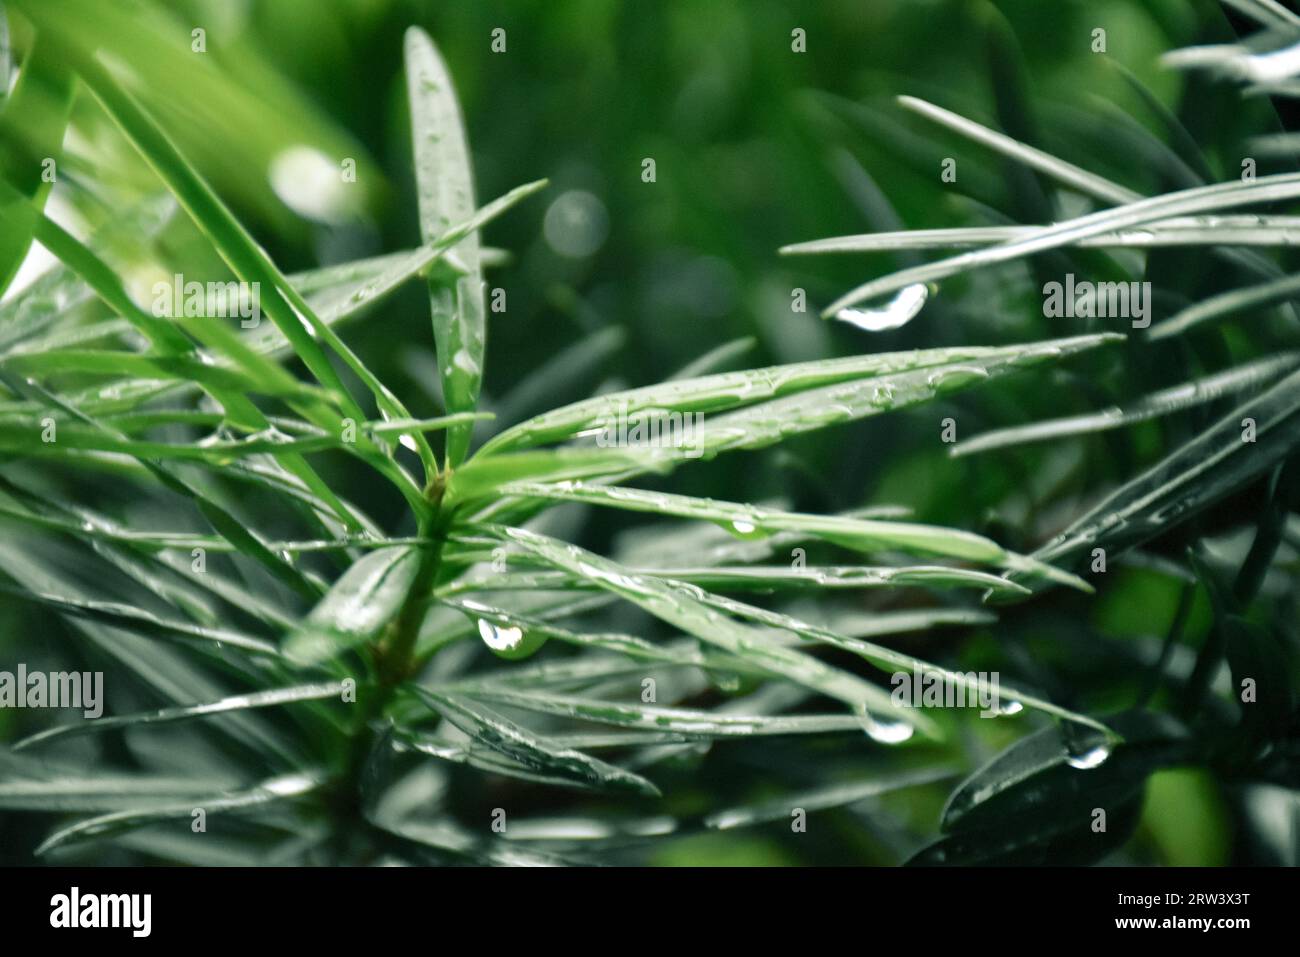 A close-up of green leaves with dew drops Stock Photo